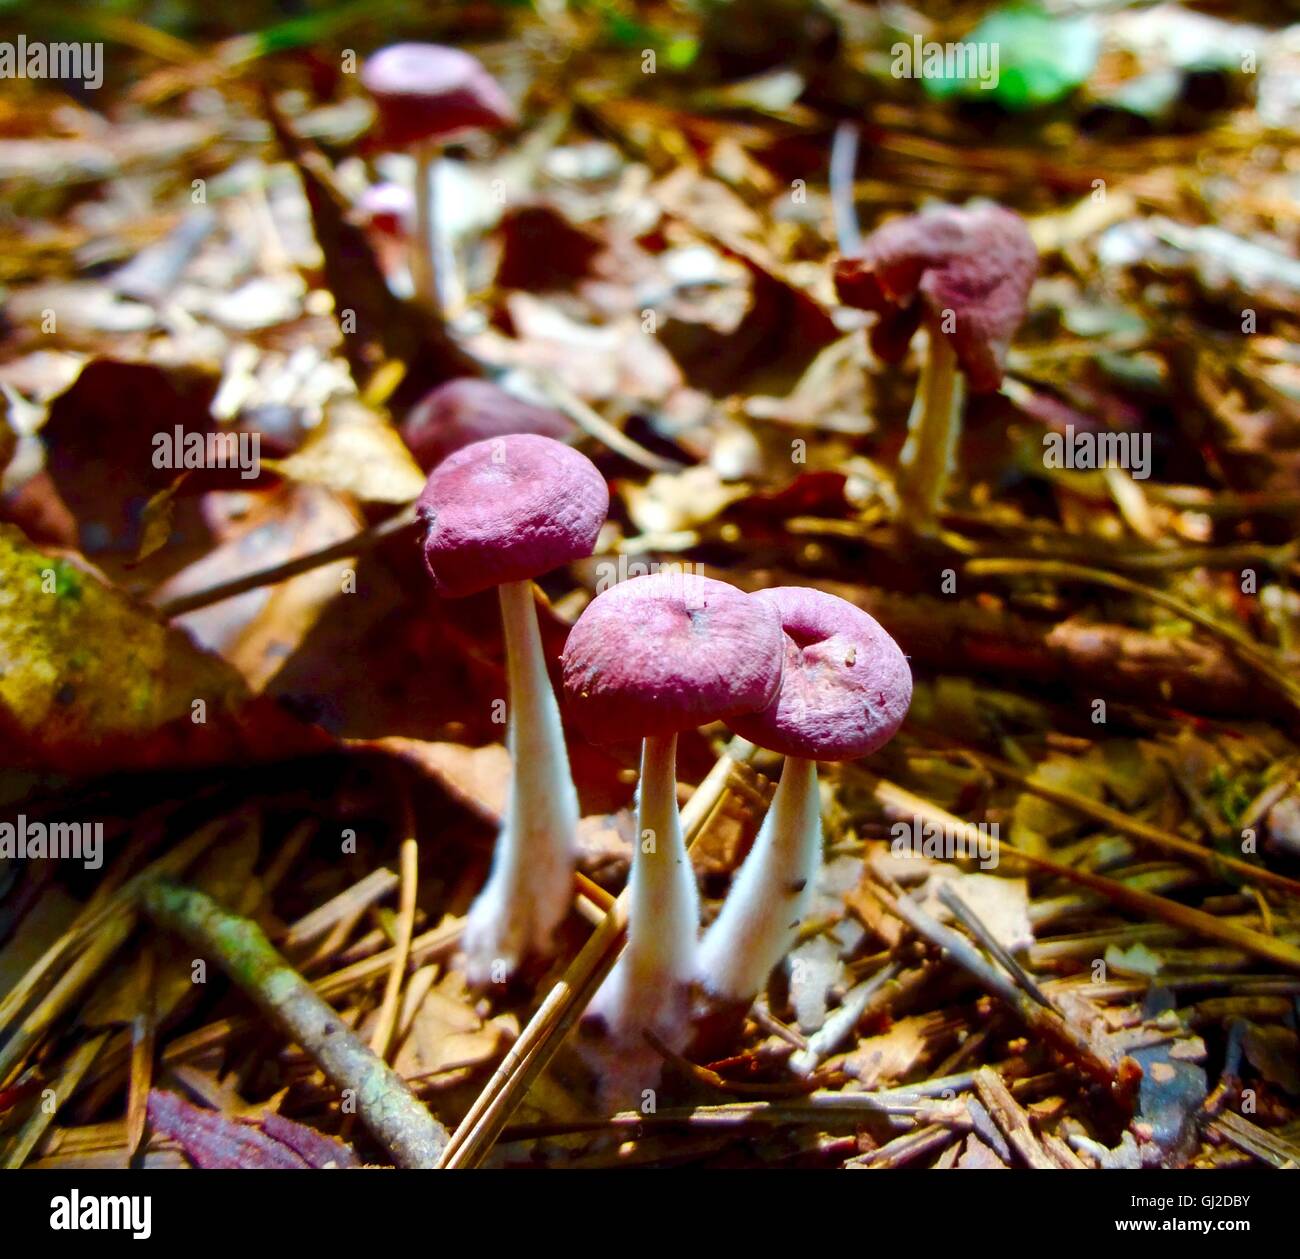 Close up of a group of purple mushrooms in a forest. Stock Photo